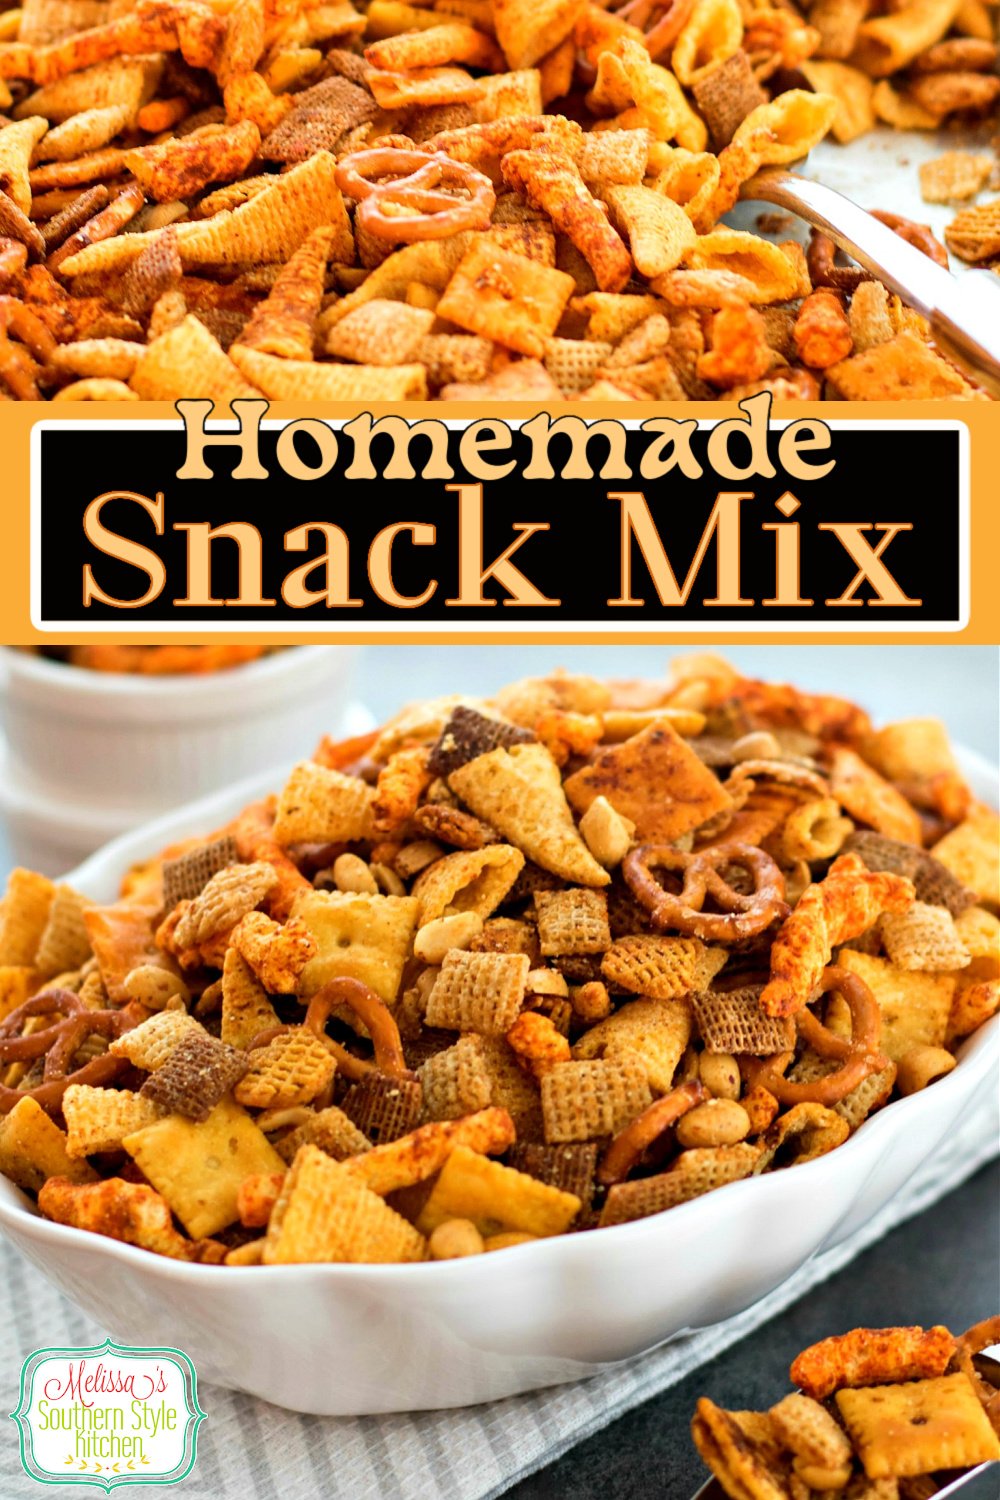 Whether you make this for snacking, family movie night or gift giving for friends, it's always a winner! #partysnackmix #partymix #homeadechexmix #snacking #appetizers #footballfood #superbowlfood #gamedayfood #homemadegifts #southernfood #southernrecipes #chexmix via @melissasssk